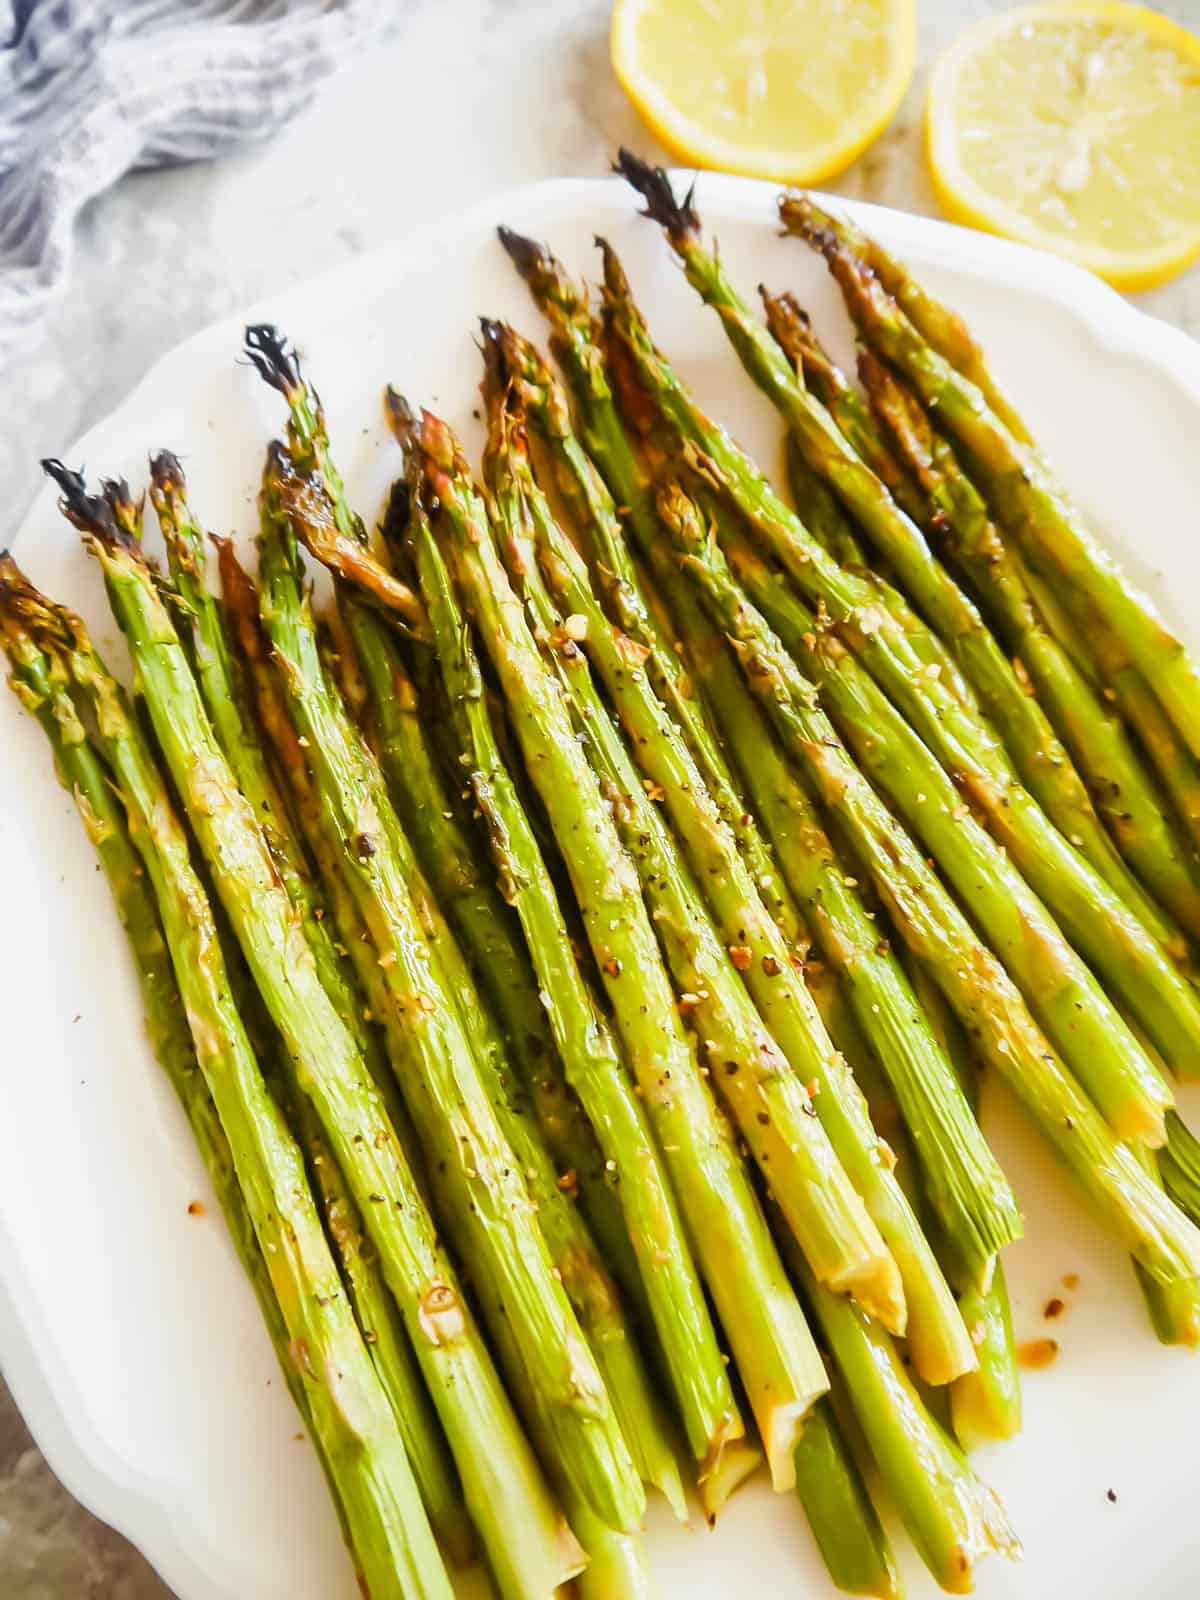 Asparagus with lemon freshly broiled and put on a plate.